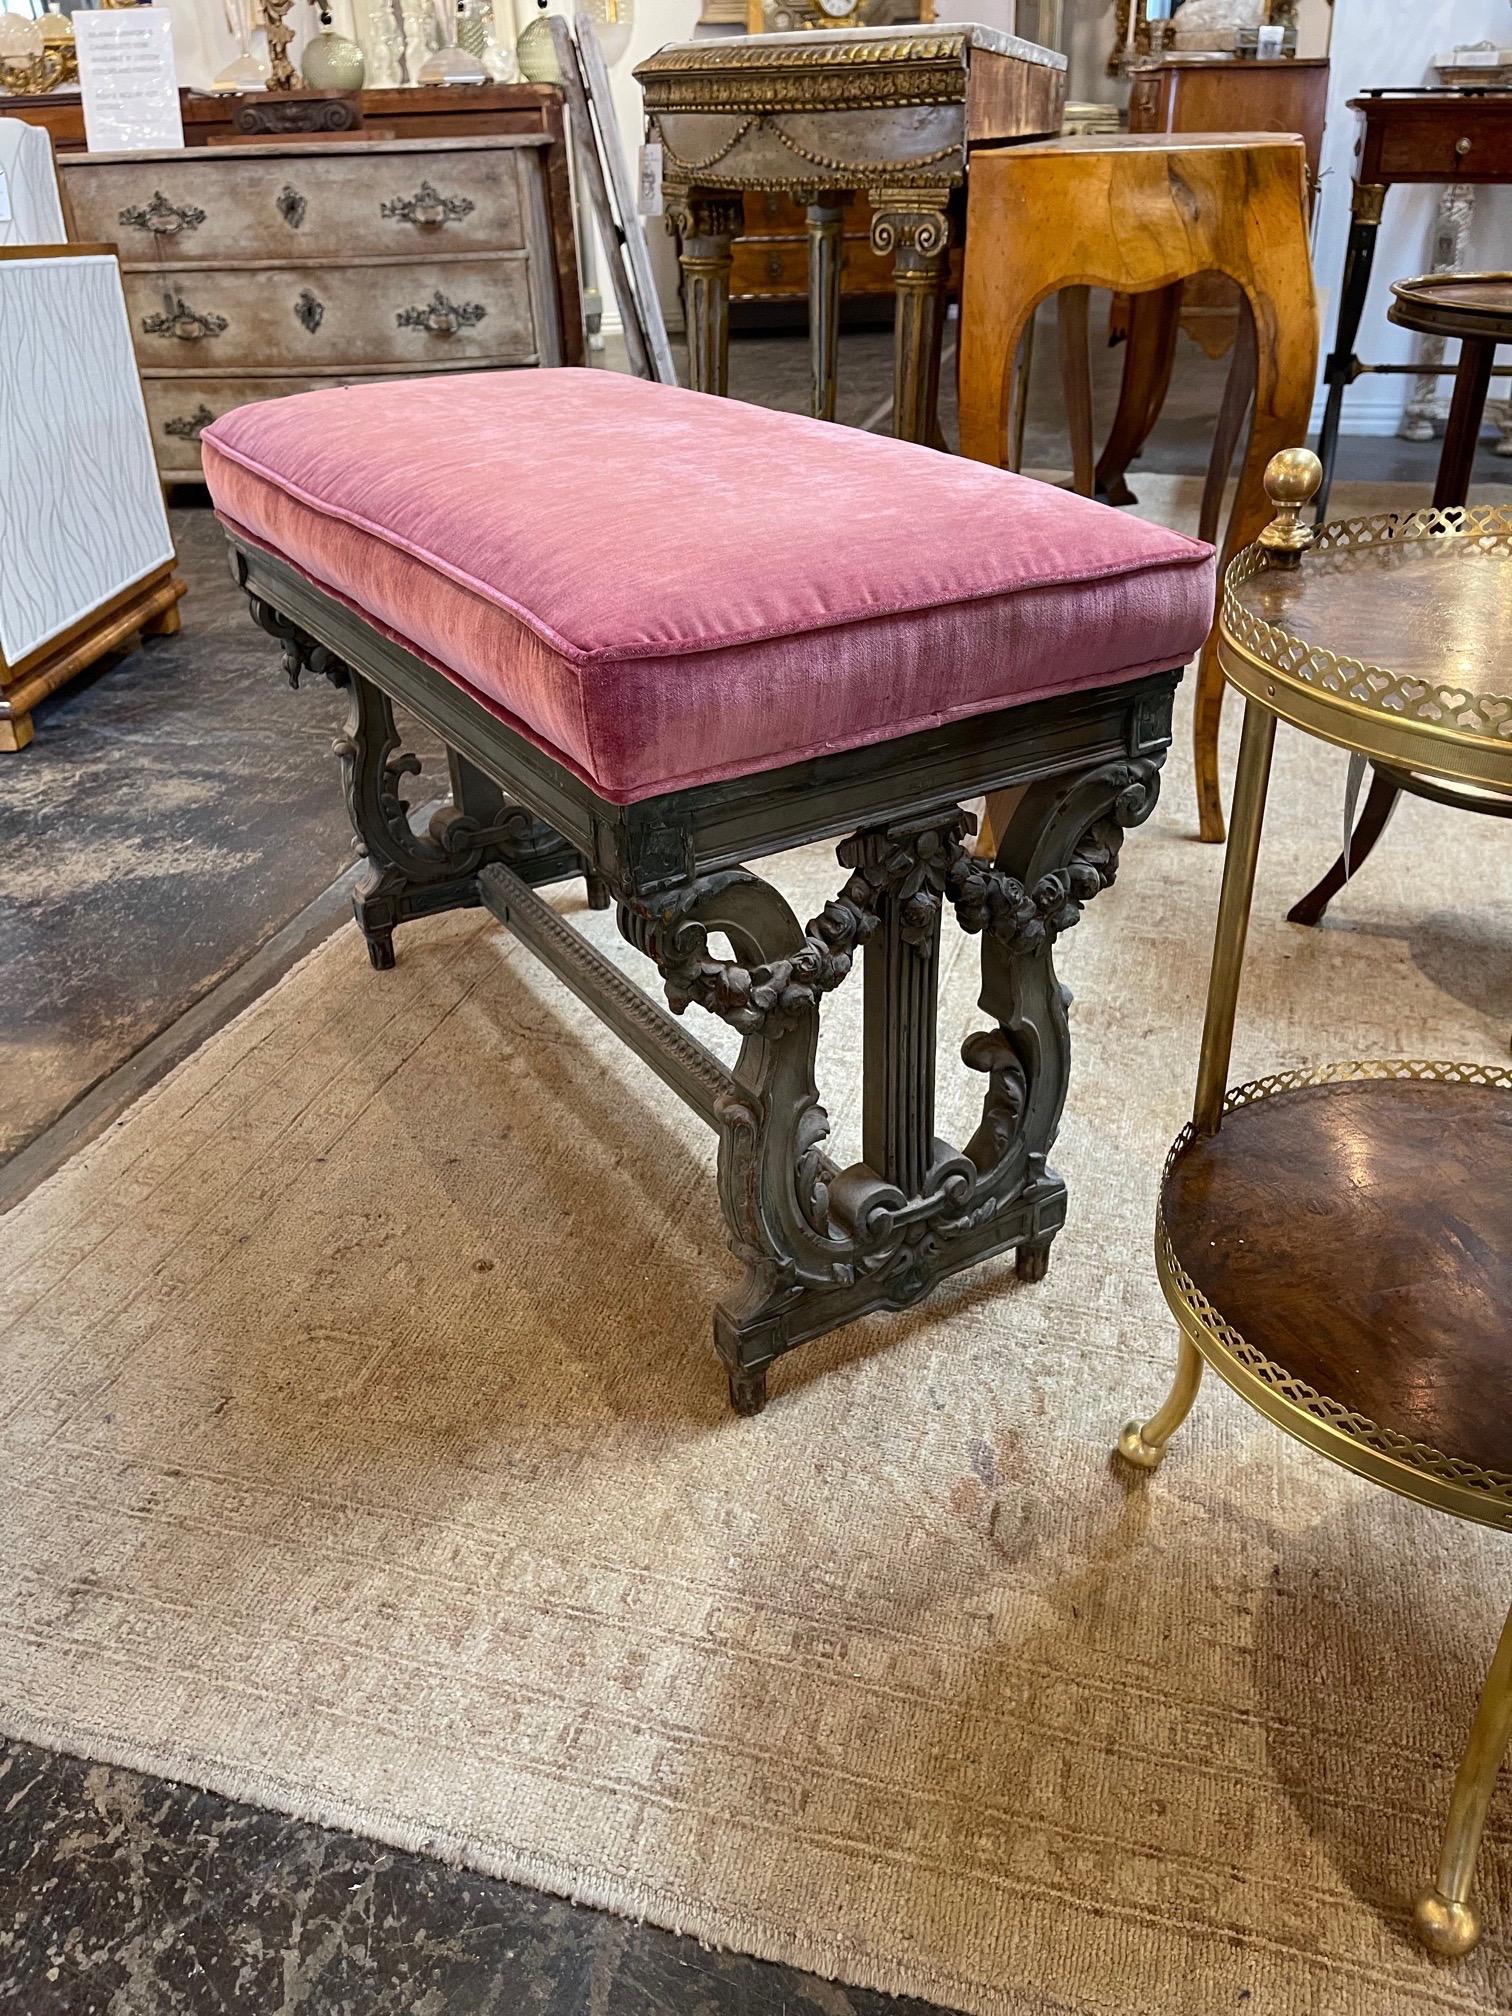 Lovely French Louis XVI style carved and painted bench. Pretty carving and upholstered in a pink velvet fabric. Great for a ladies dressing room!